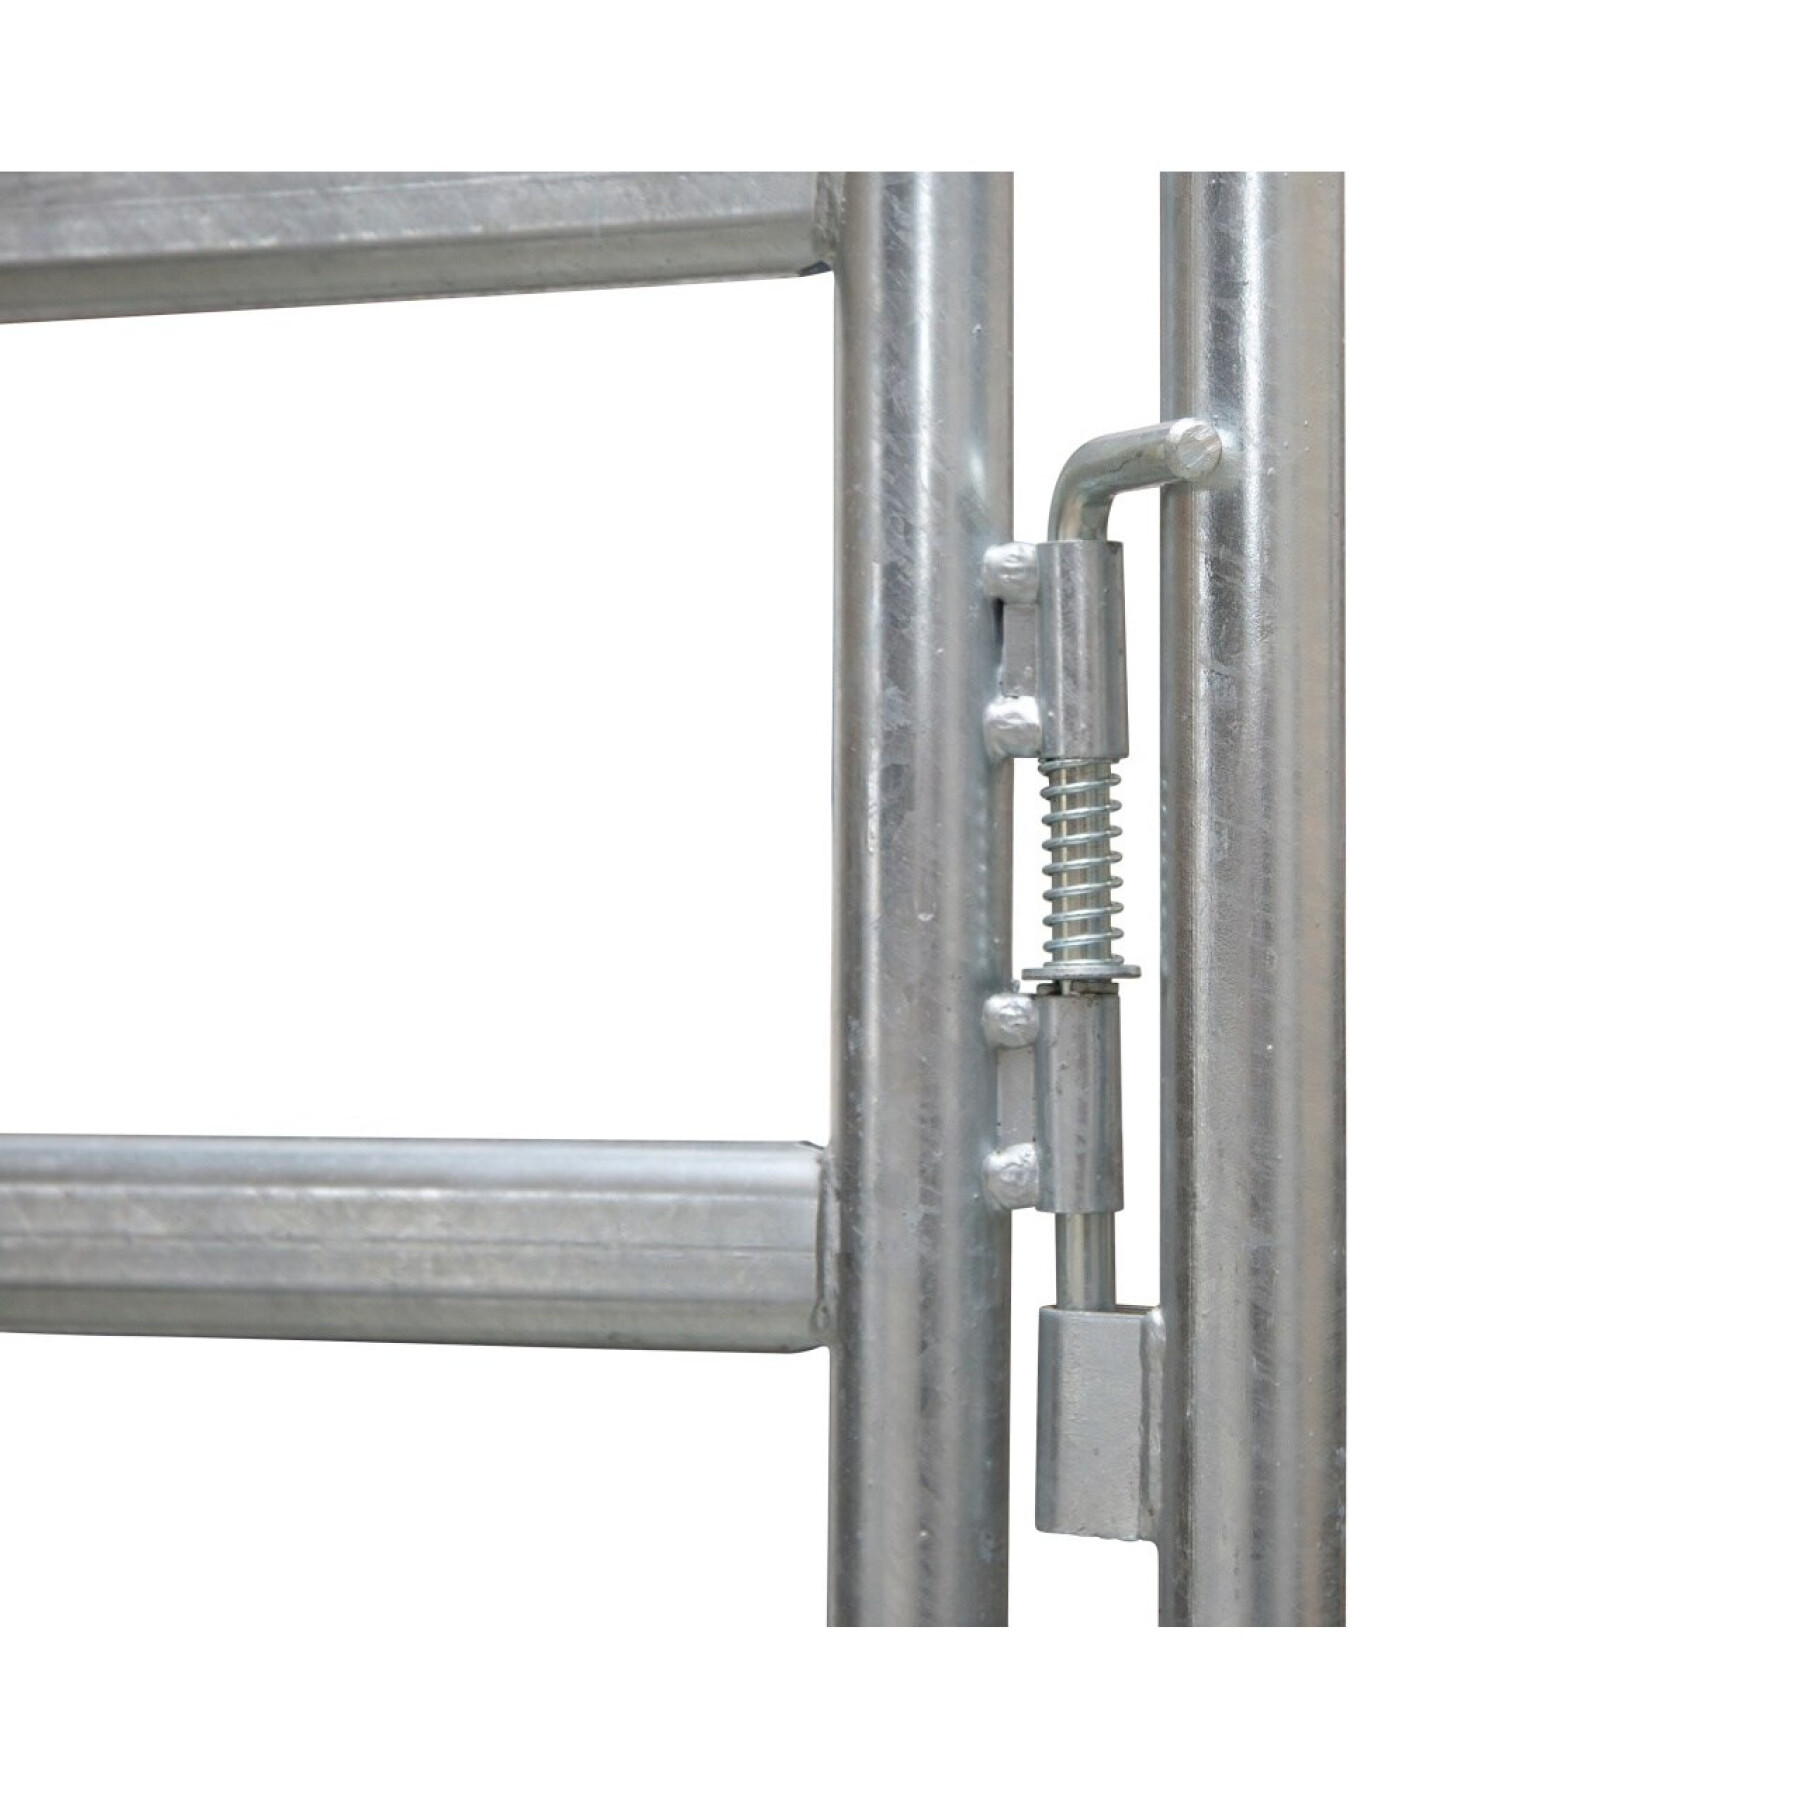 Pre-galvanized panel with horse-riding gate Kerbl